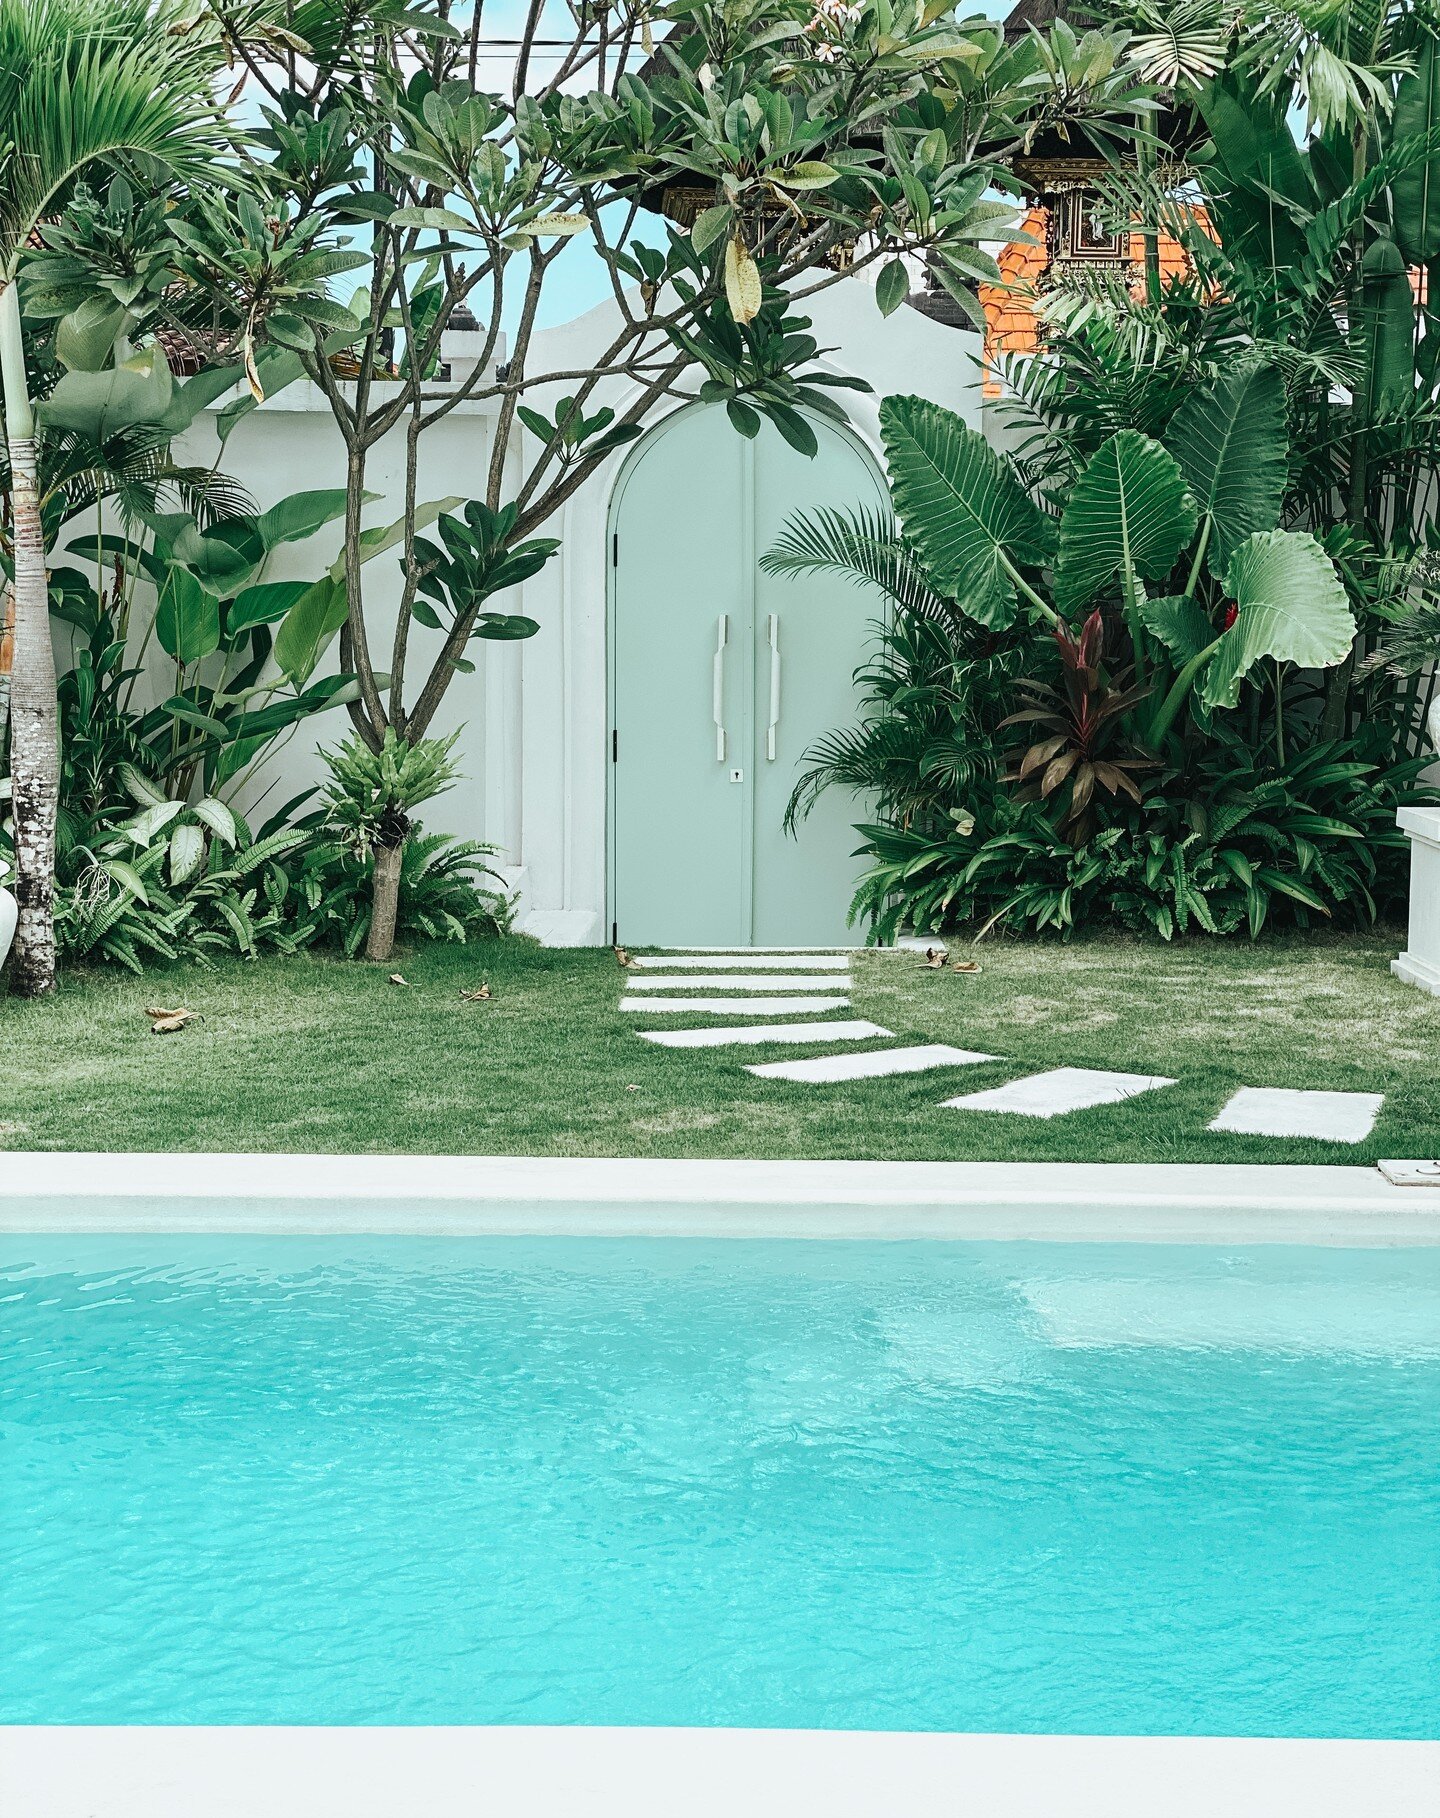 Nature inspires us everyday 🍃

#morningglory #tropical #canggu #balivilla #poolside #archilovers